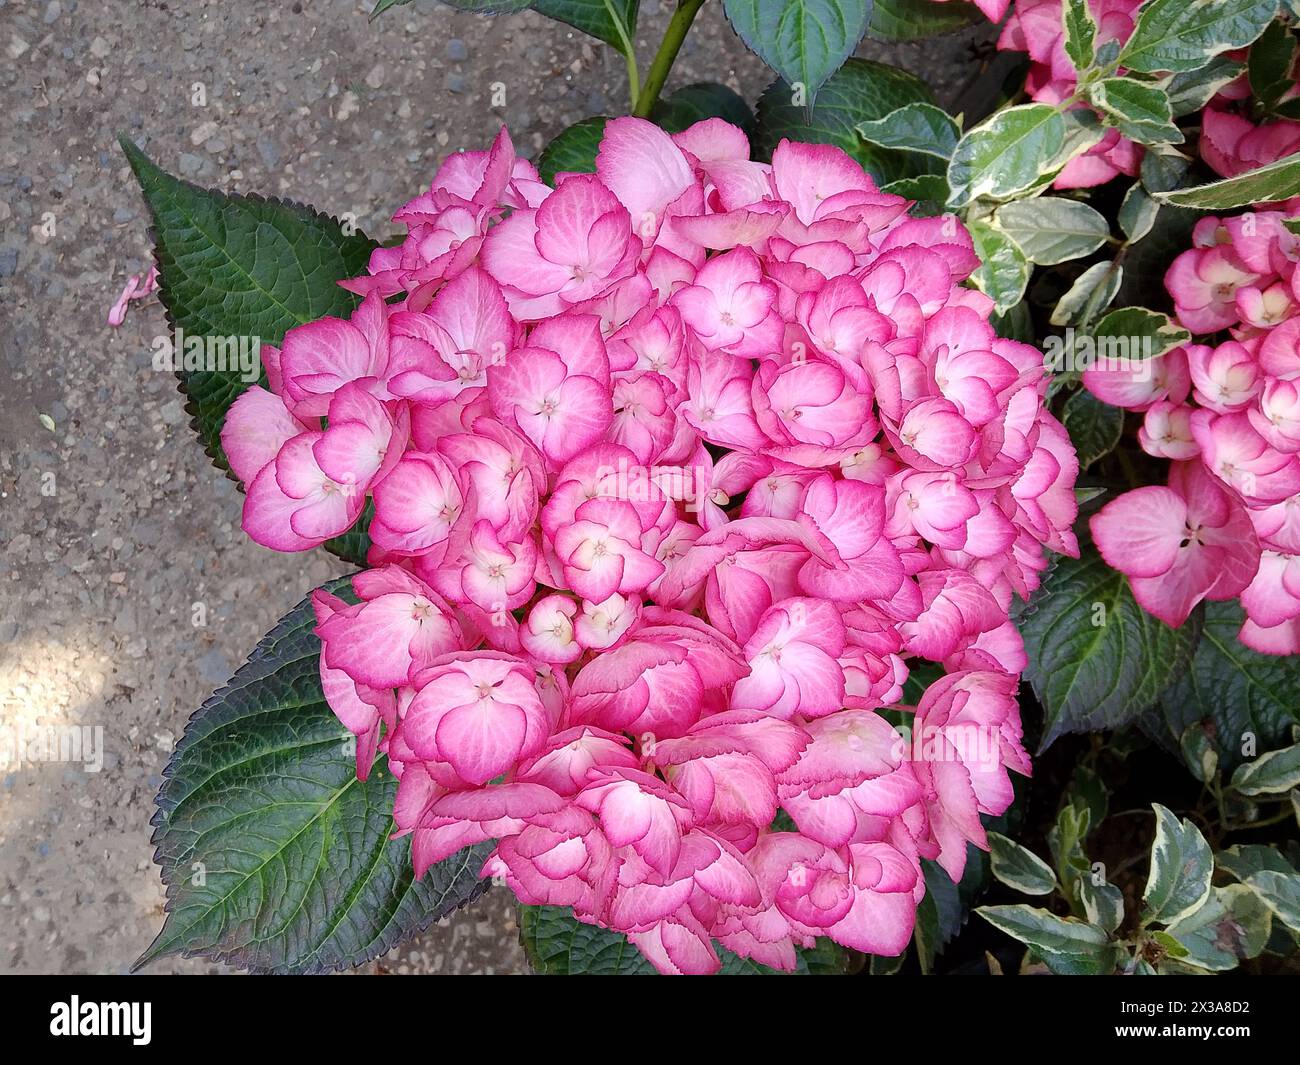 A stunning close-up of a lush hydrangea flower head bursting with tightly clustered, vividly pink petals that create a full, rounded shape. The deep g Stock Photo